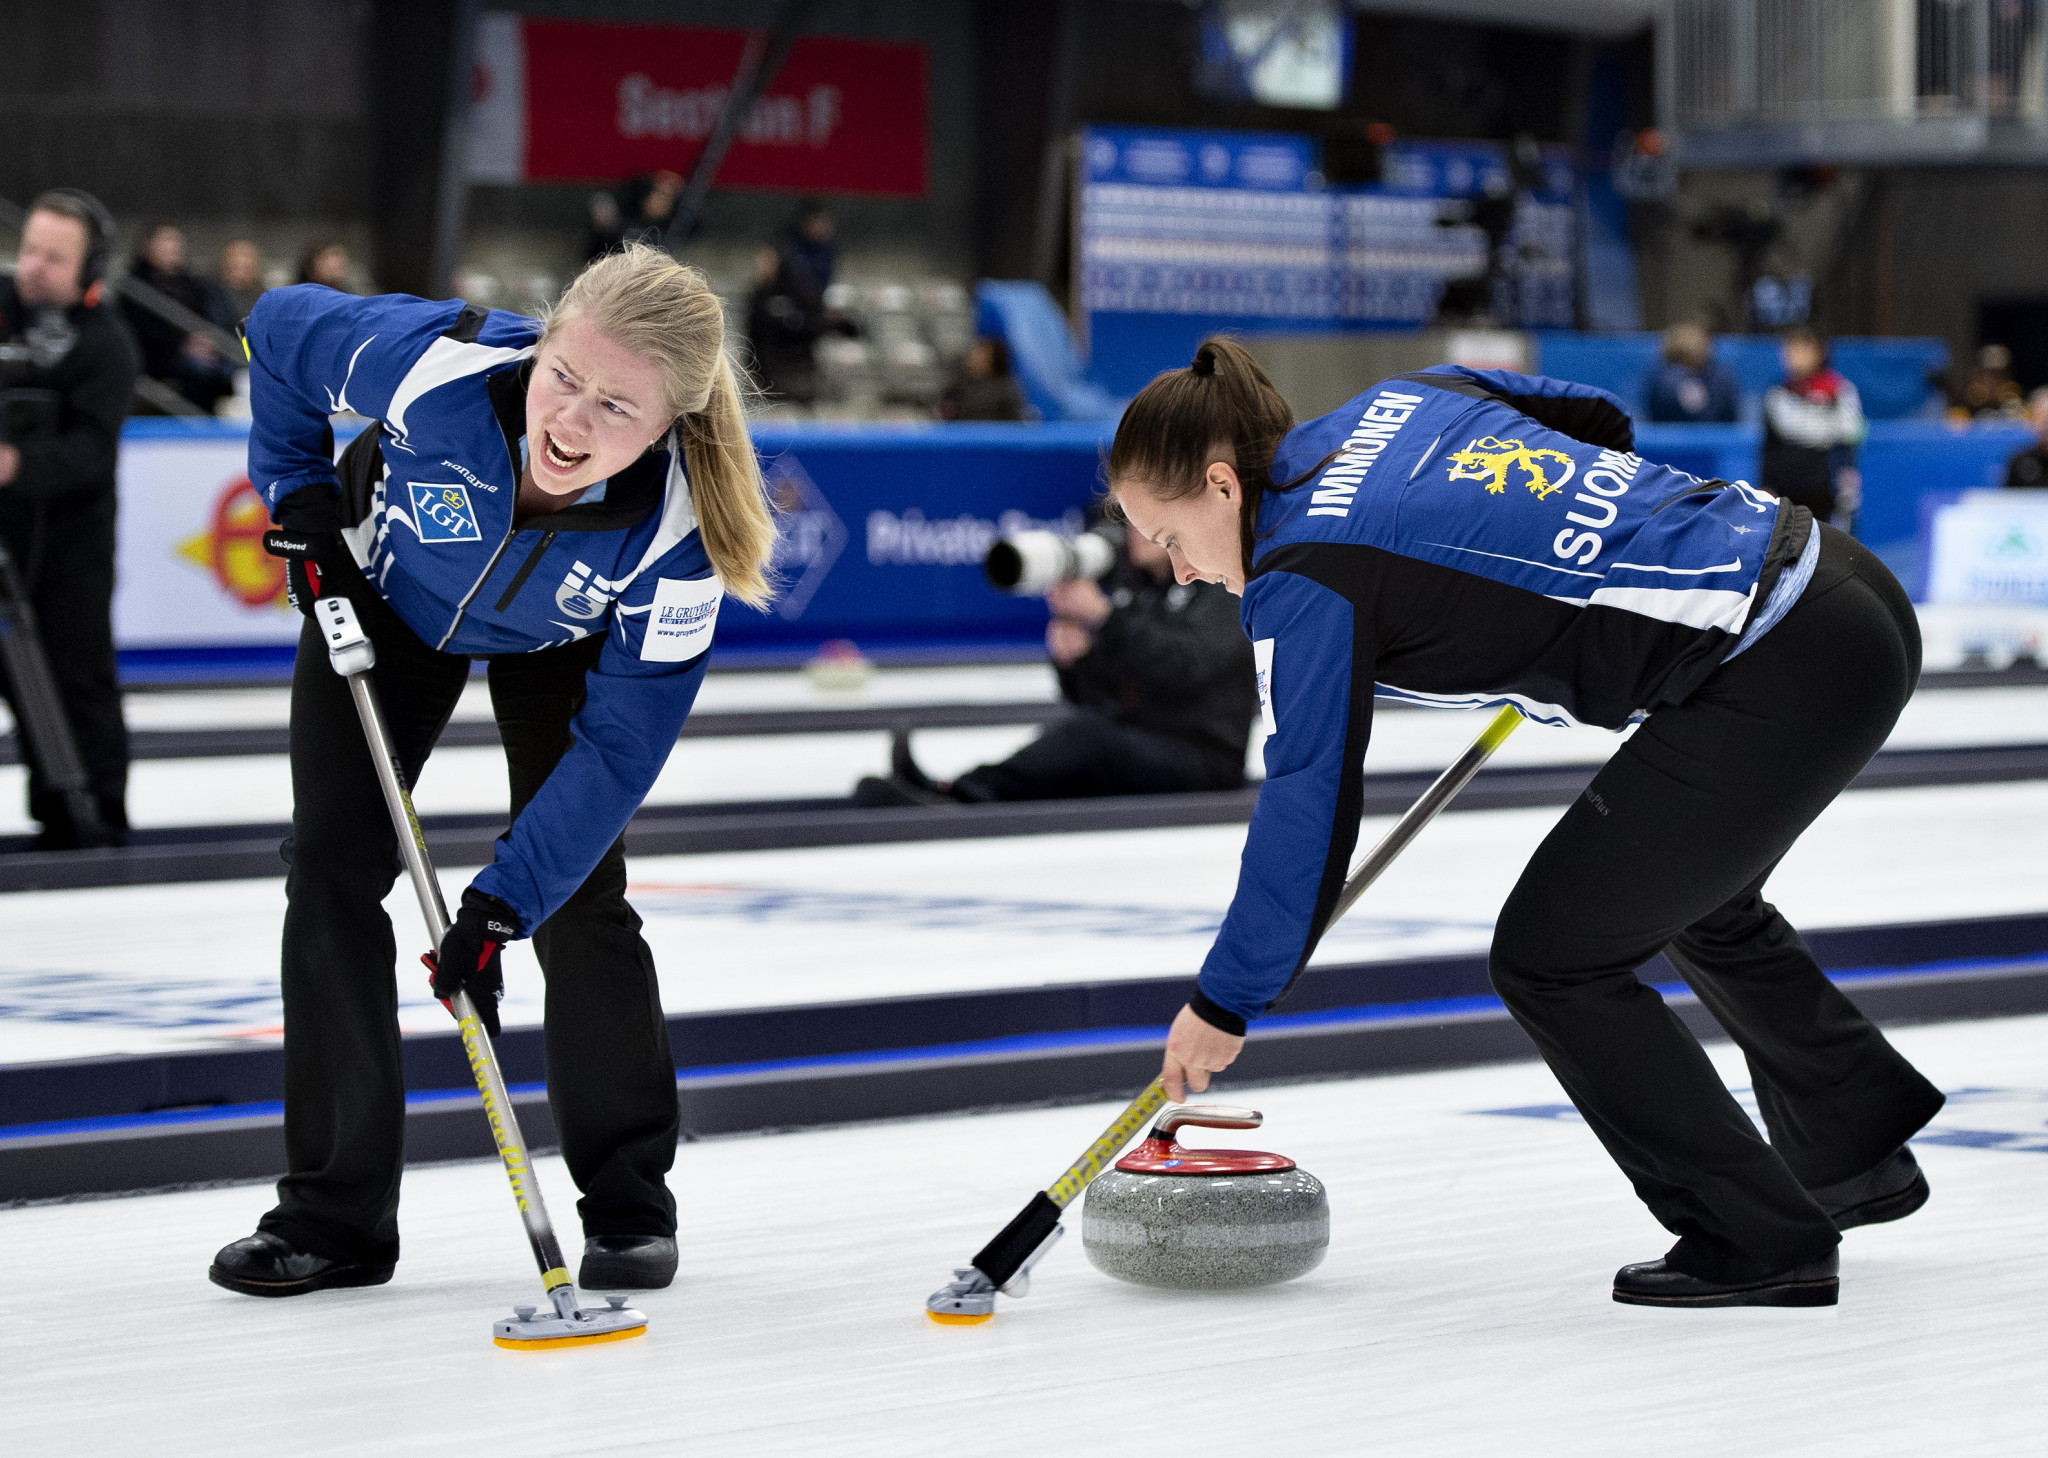 Hosts Finland are set to compete in both the men's and women's competition ©Getty Images